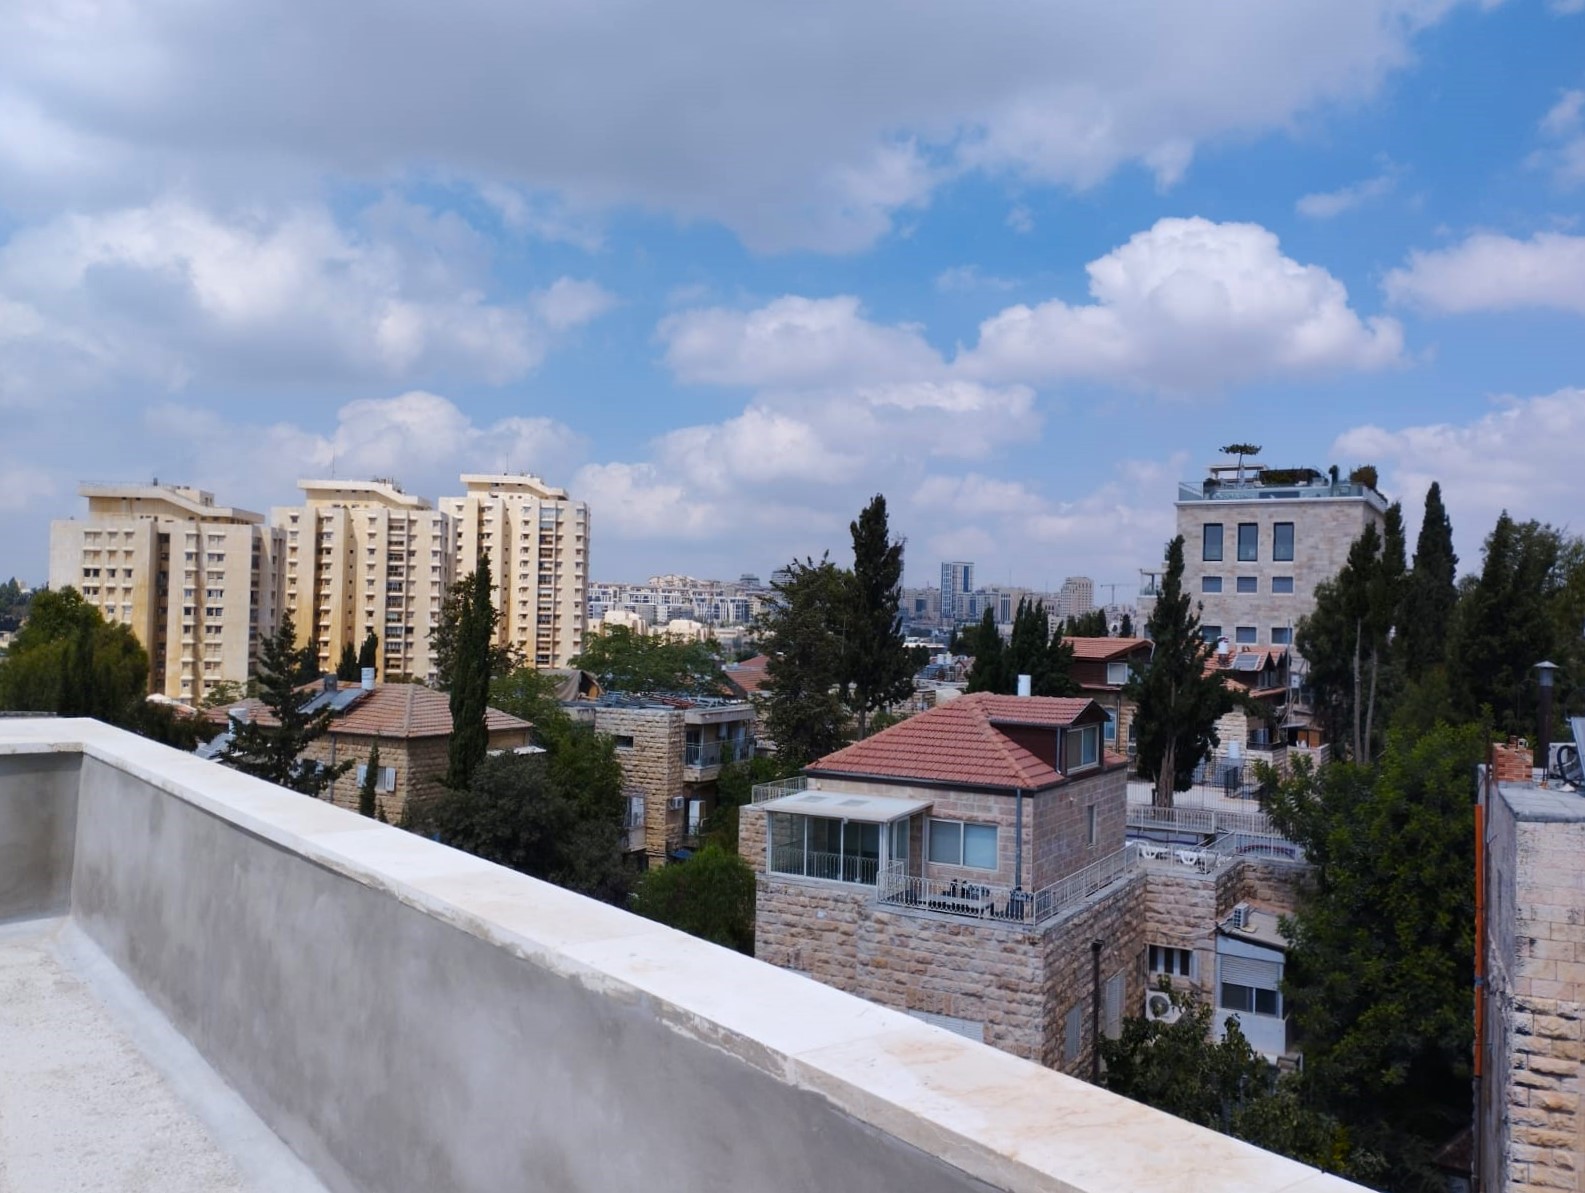 For Sale: A Duplex Penthouse Apartment in Shaarei Chesed